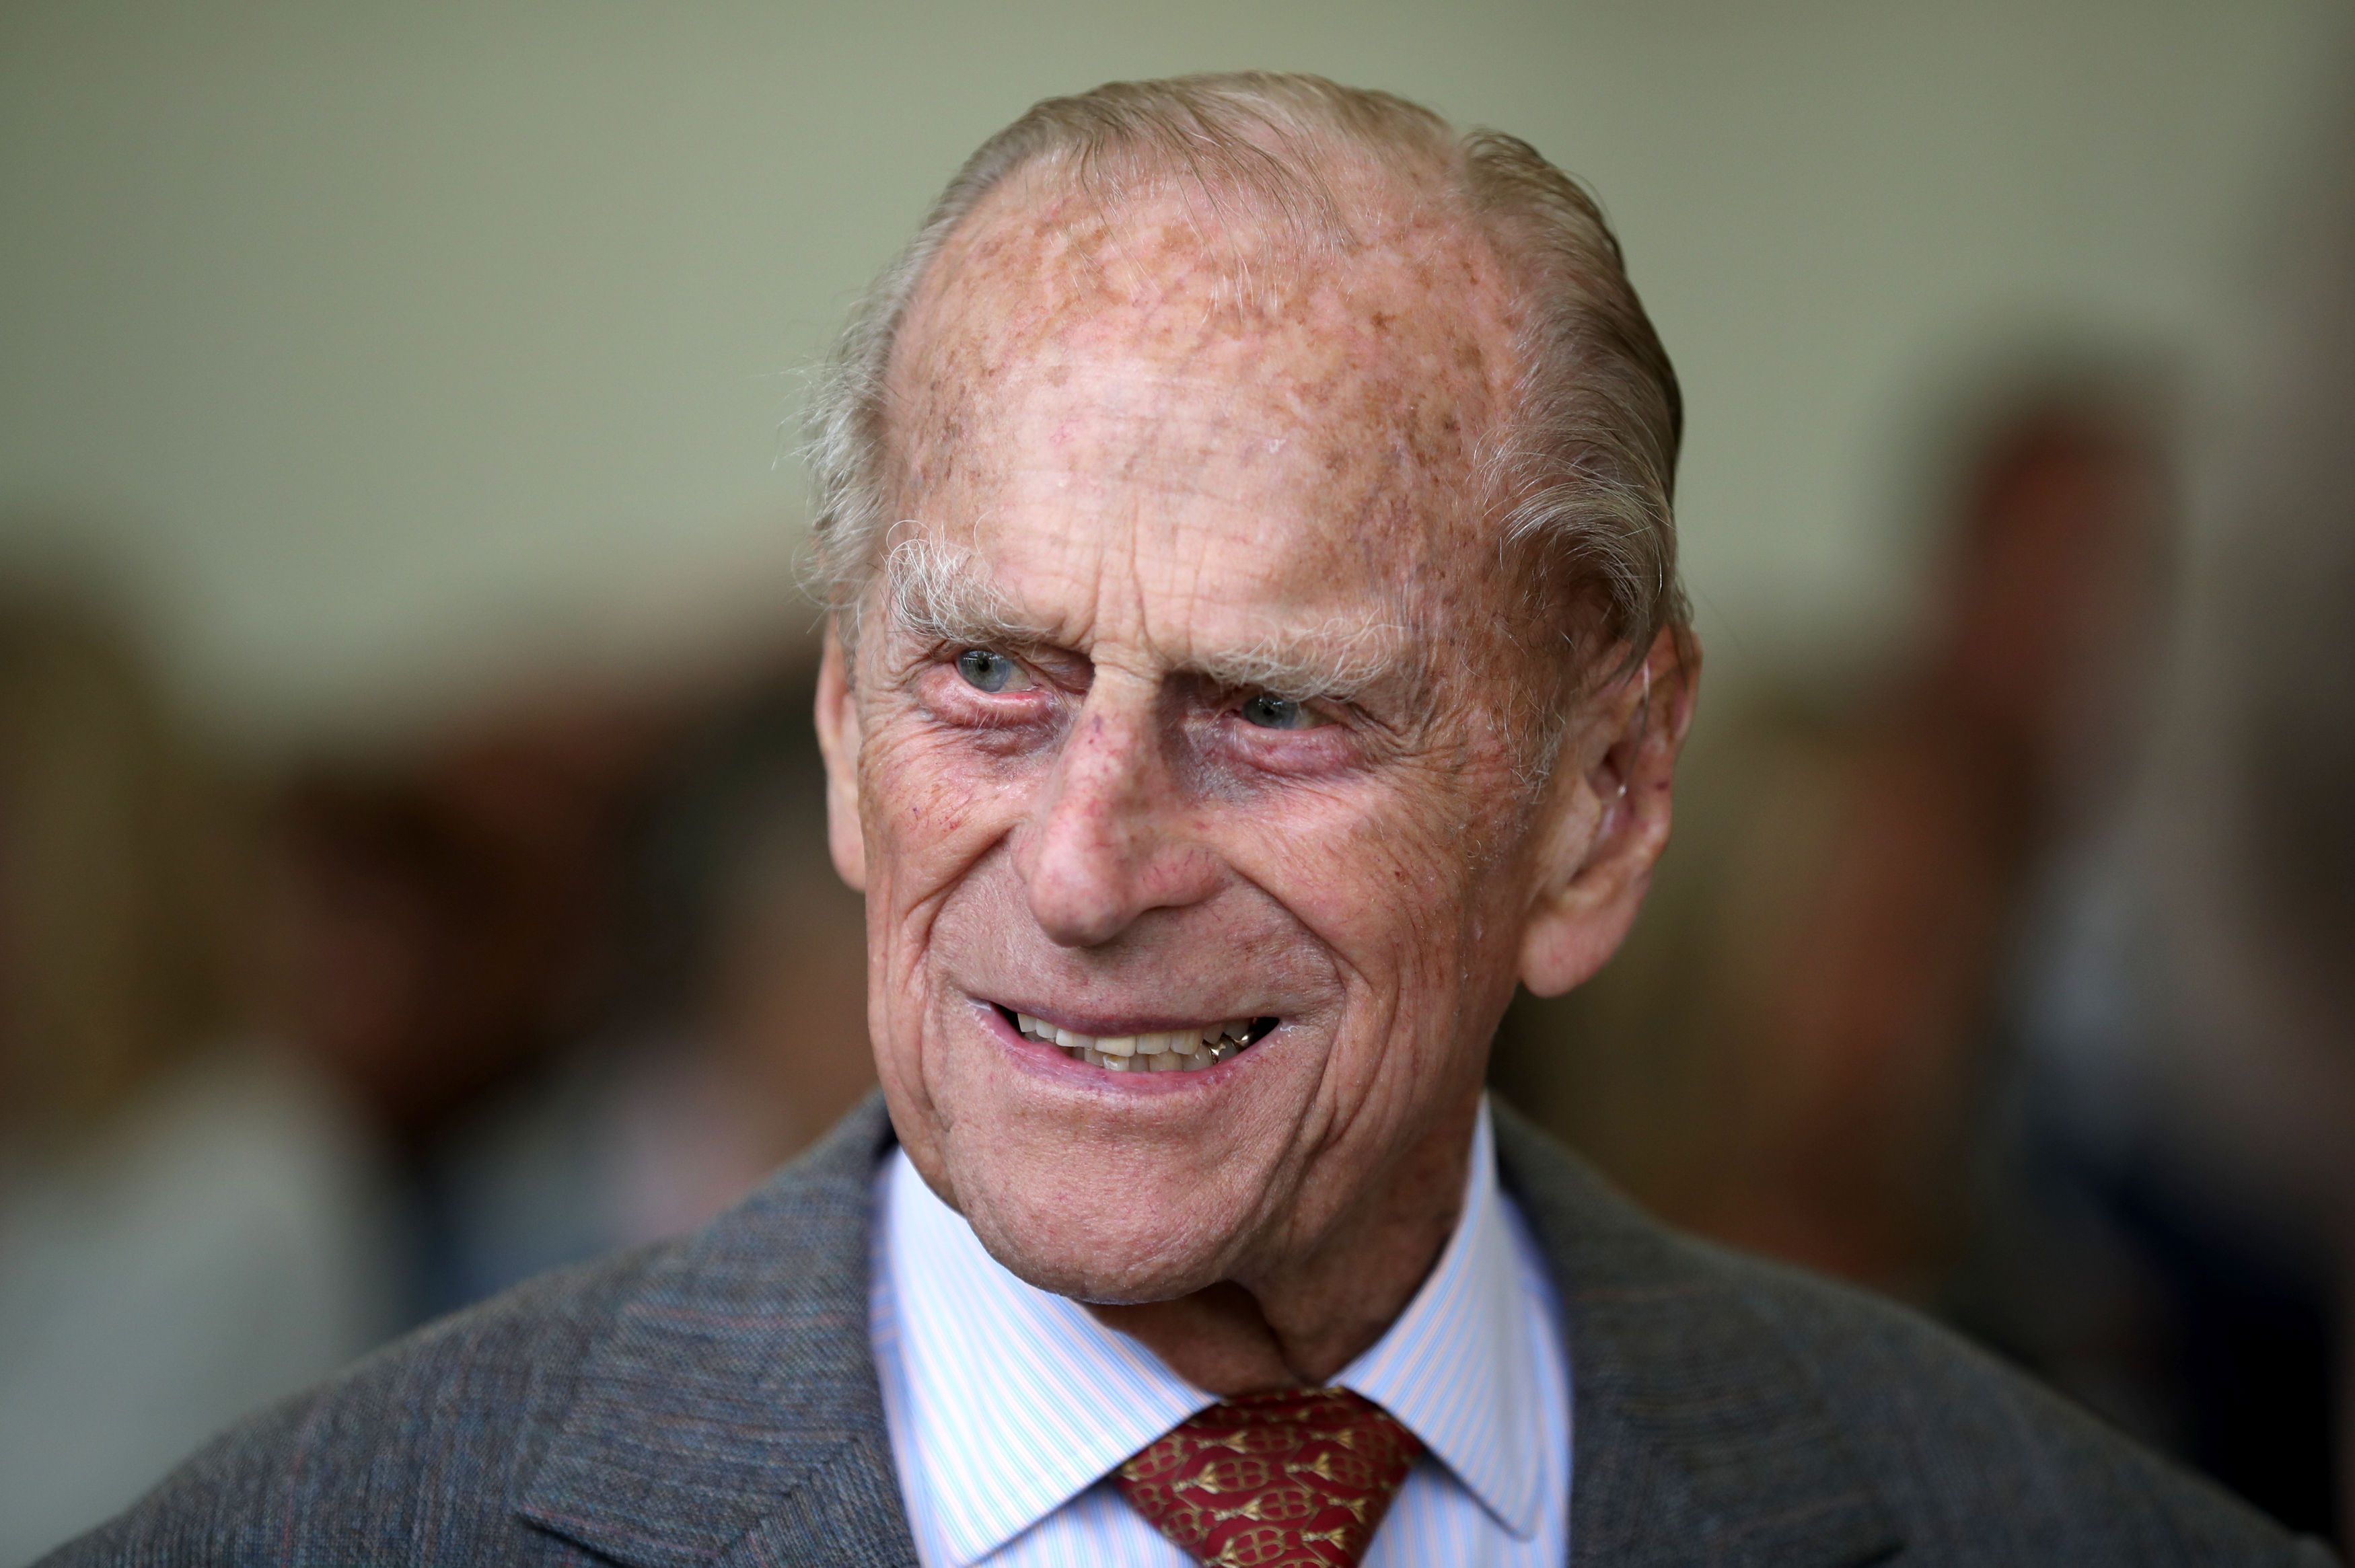 Prince Philip at the Presentation Reception for The Duke of Edinburgh Gold Award holders in the gardens at the Palace of Holyroodhouse on July 6, 2017 | Photo: Getty Images